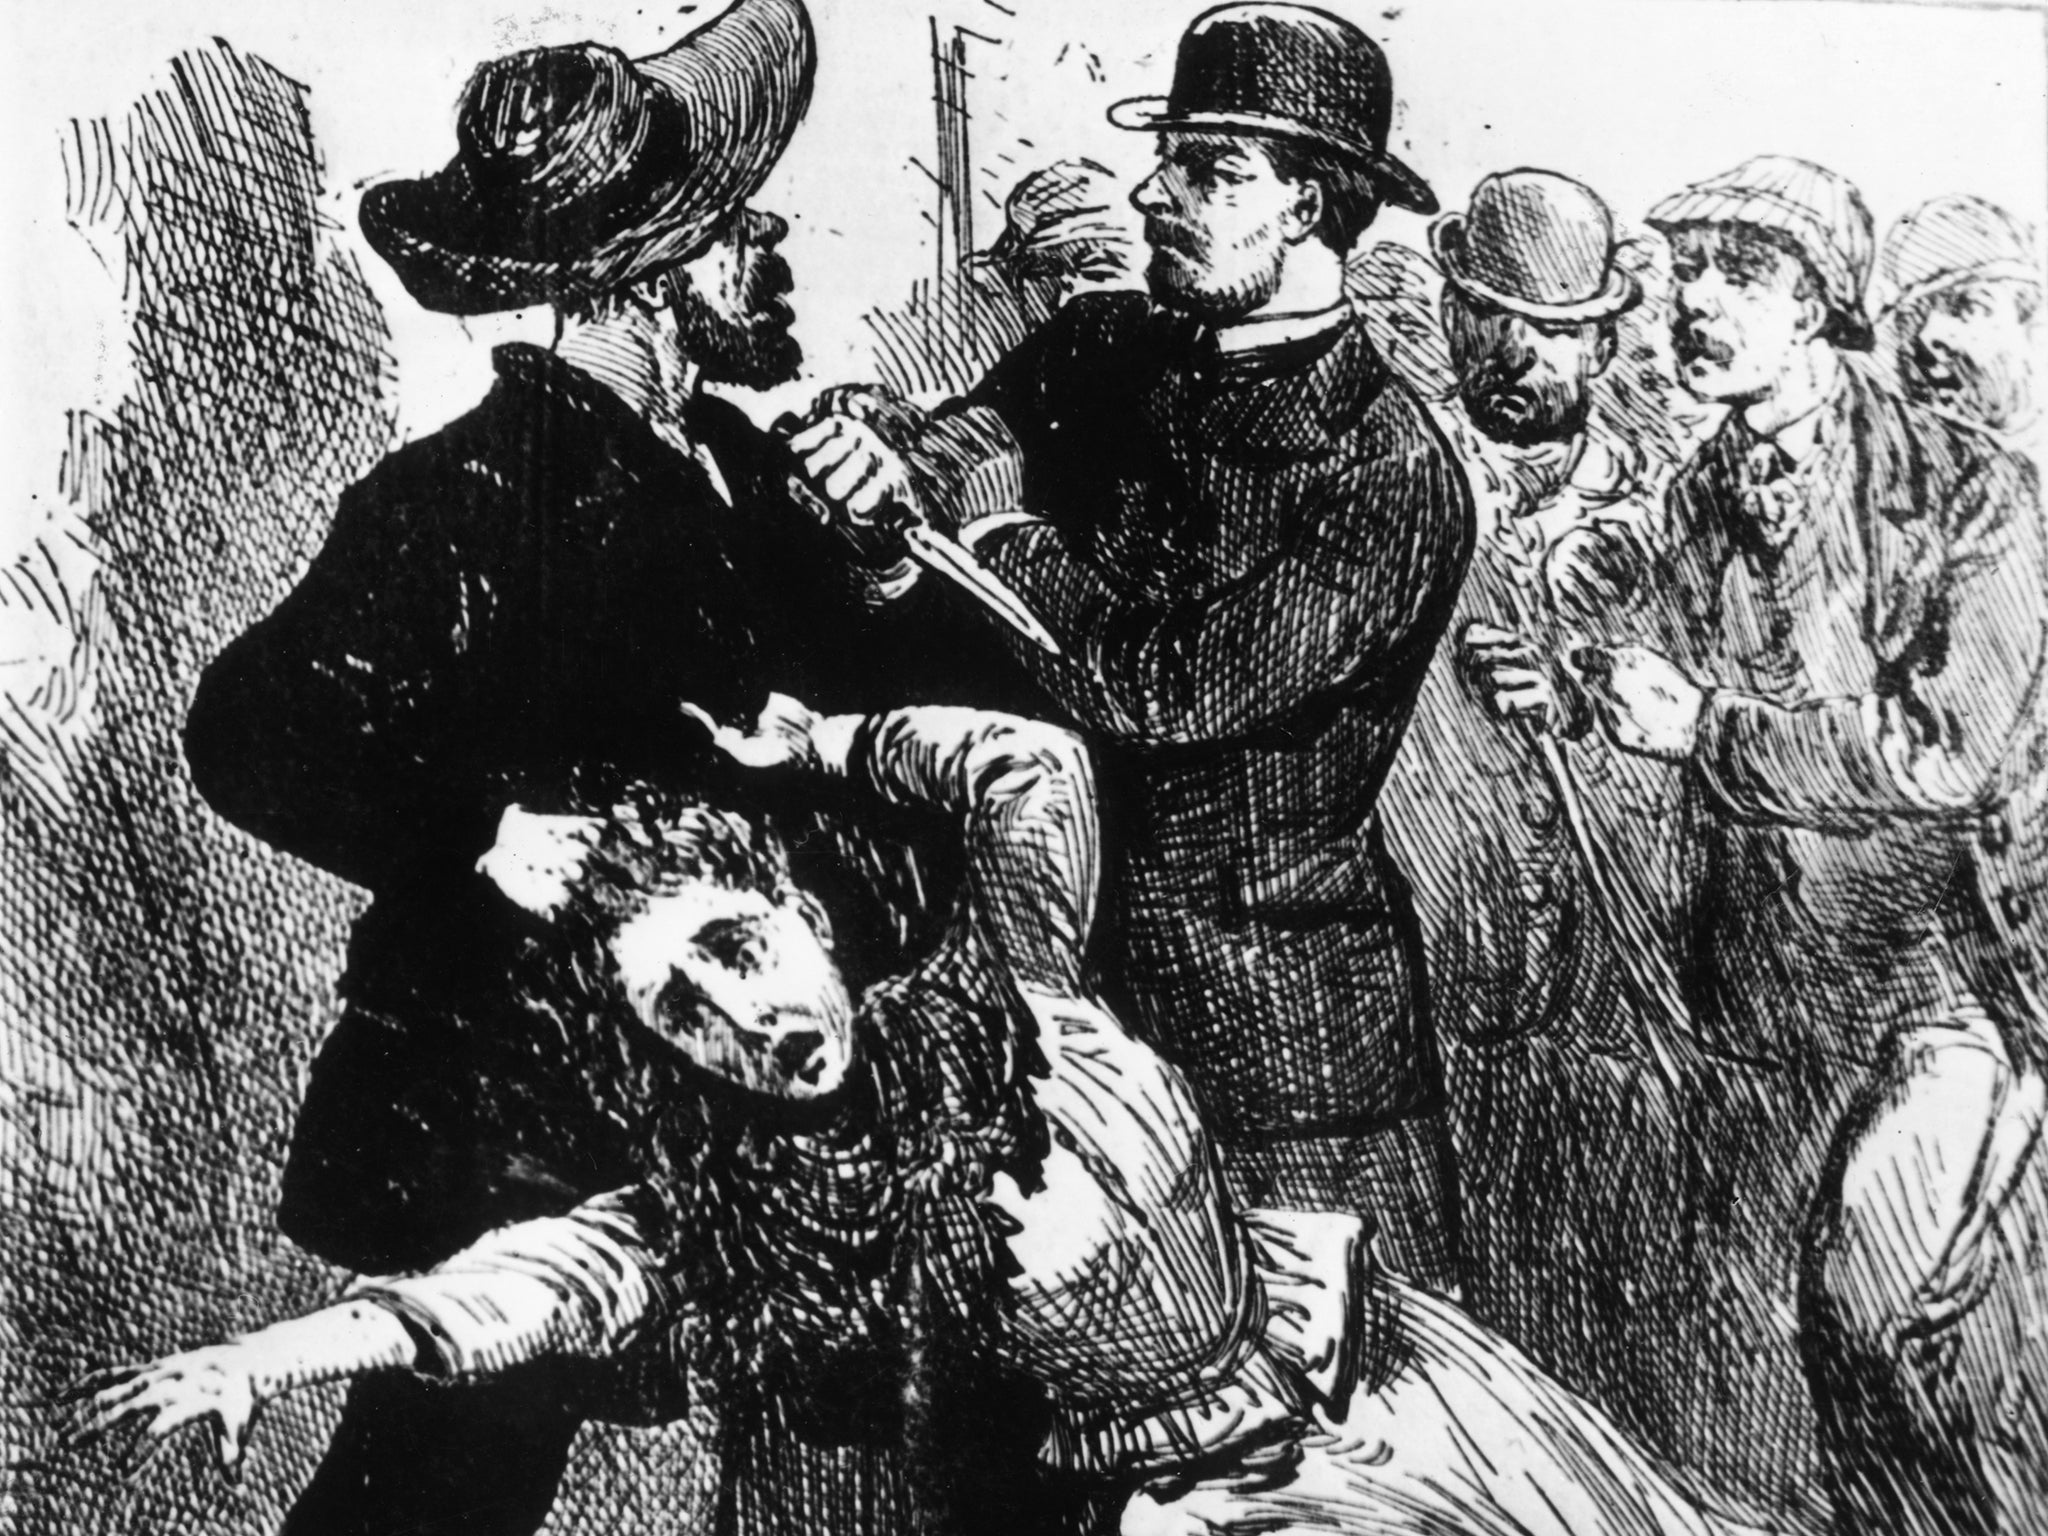 'Jack the Ripper' is generally believed to have been active in the Whitechapel district of London, committing five brutal murders between August and November 1888